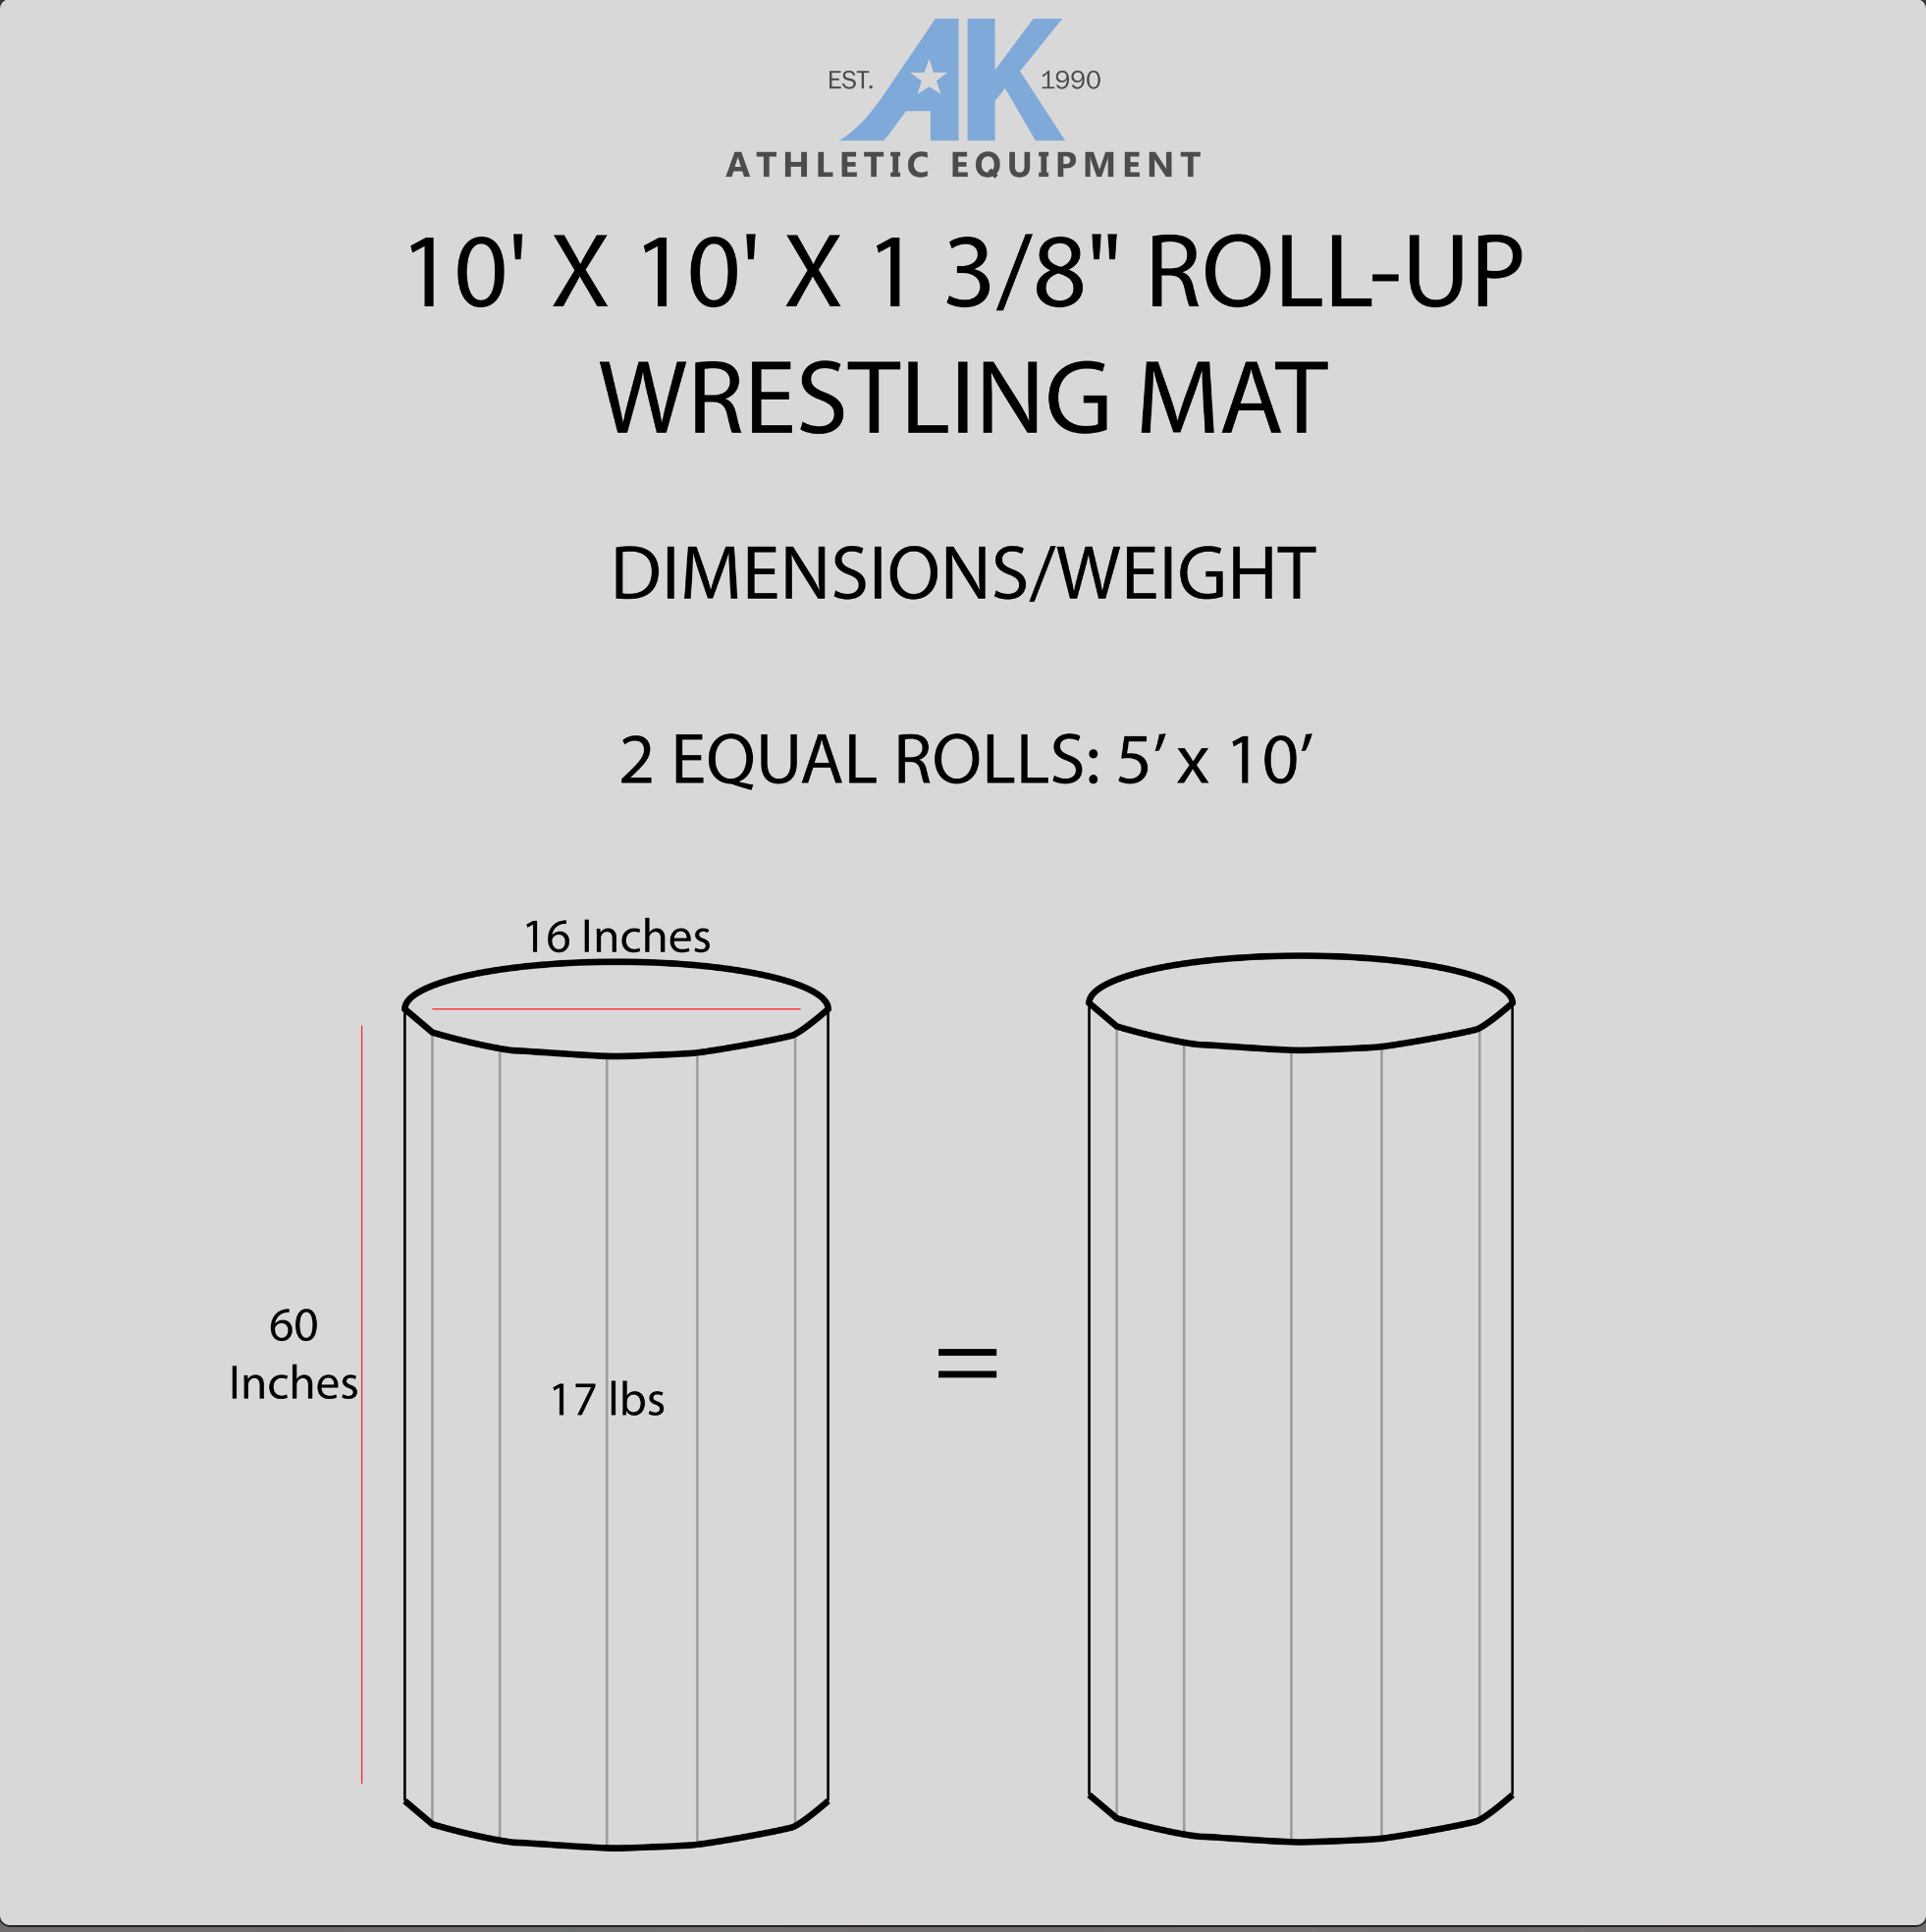 AK Athletic Equipment 10 x 10 wrestling mat storage specifications. Roll-up the floor padding for easy storage.